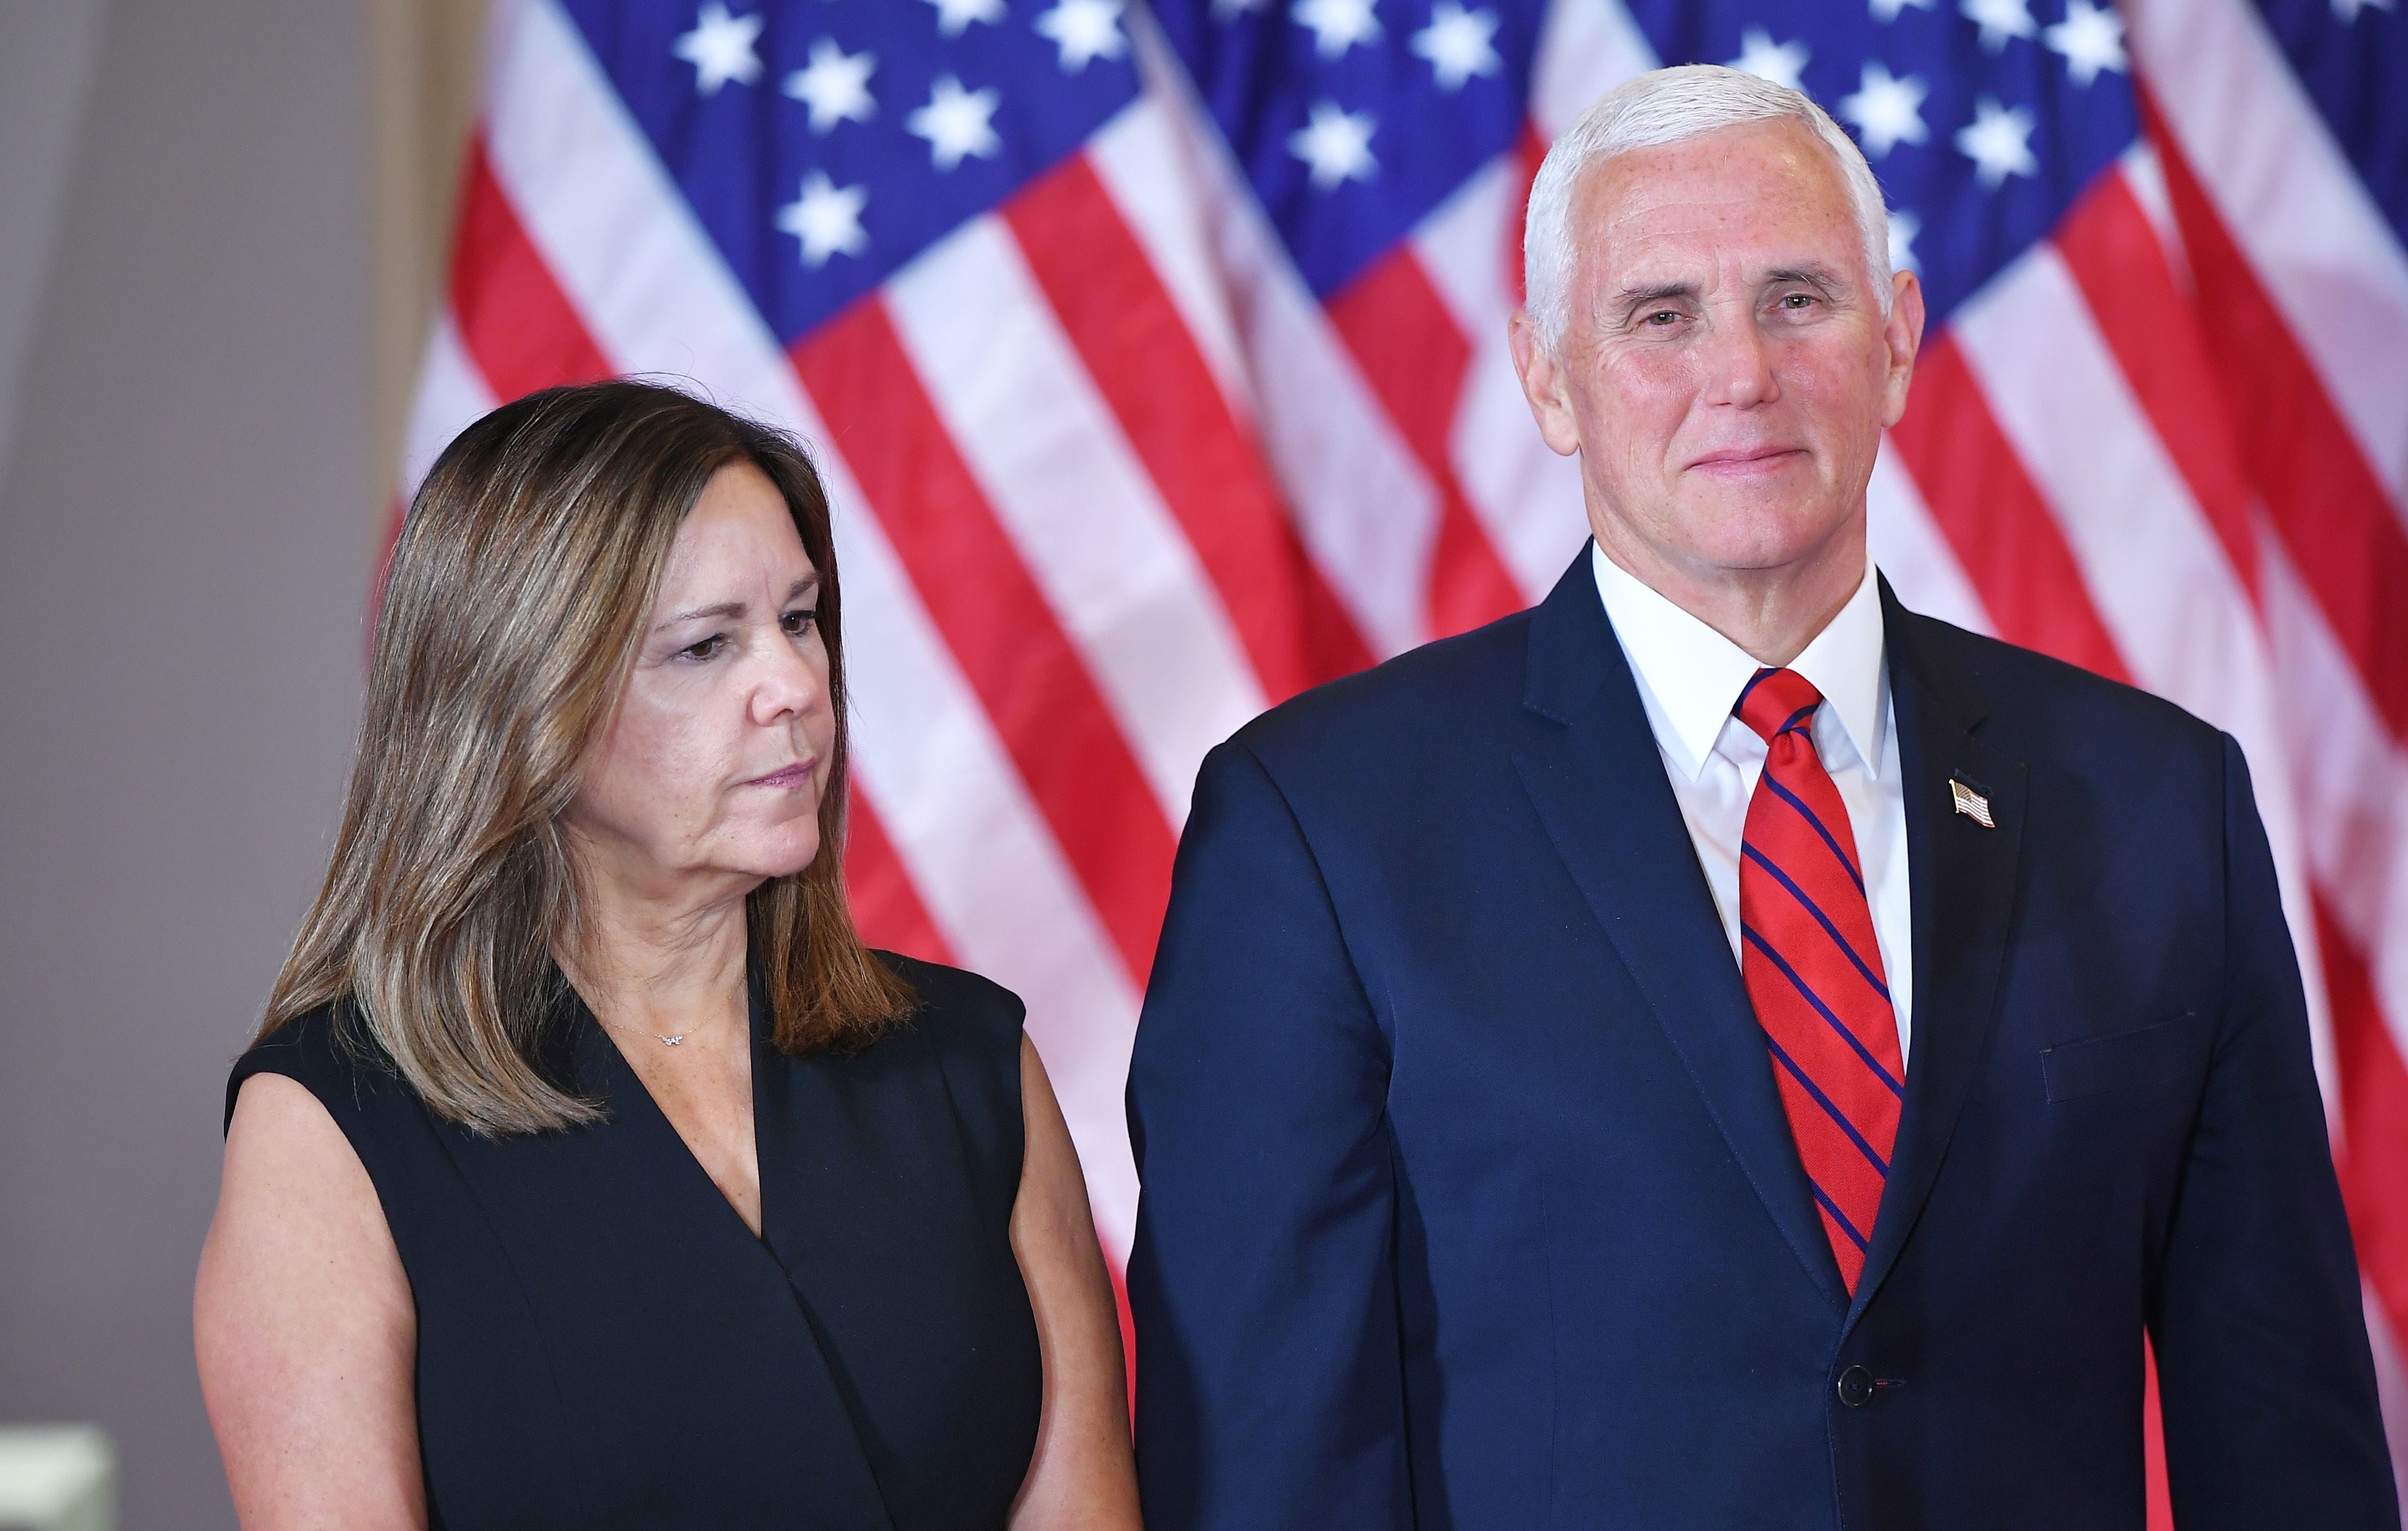 Vice president Mike Pence to get public Covid vaccine shot at White House